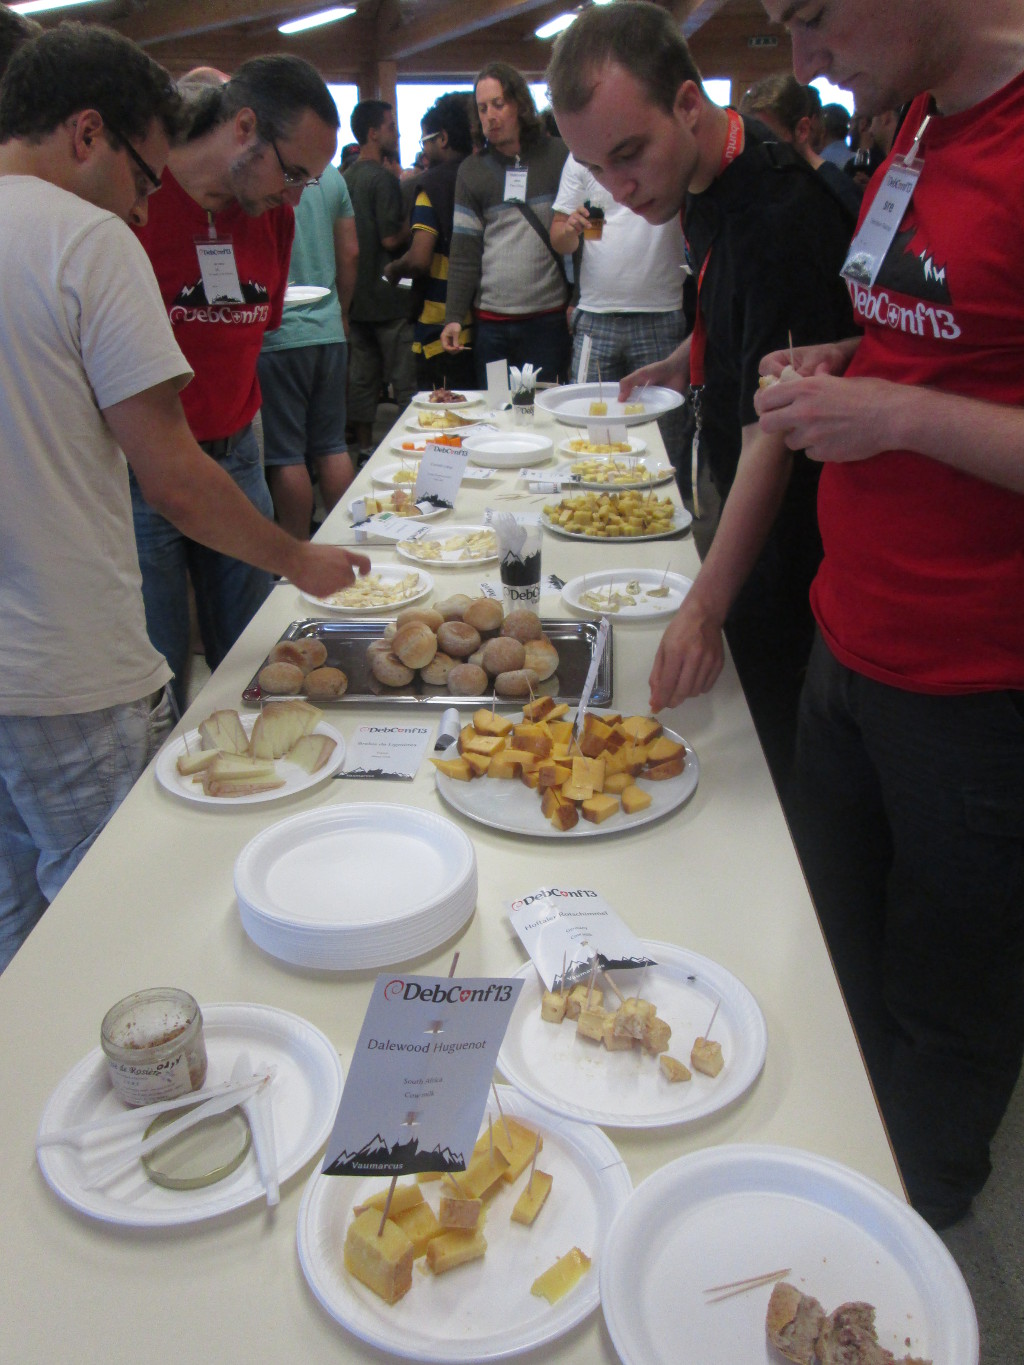 typical DebConf cheese & wine table